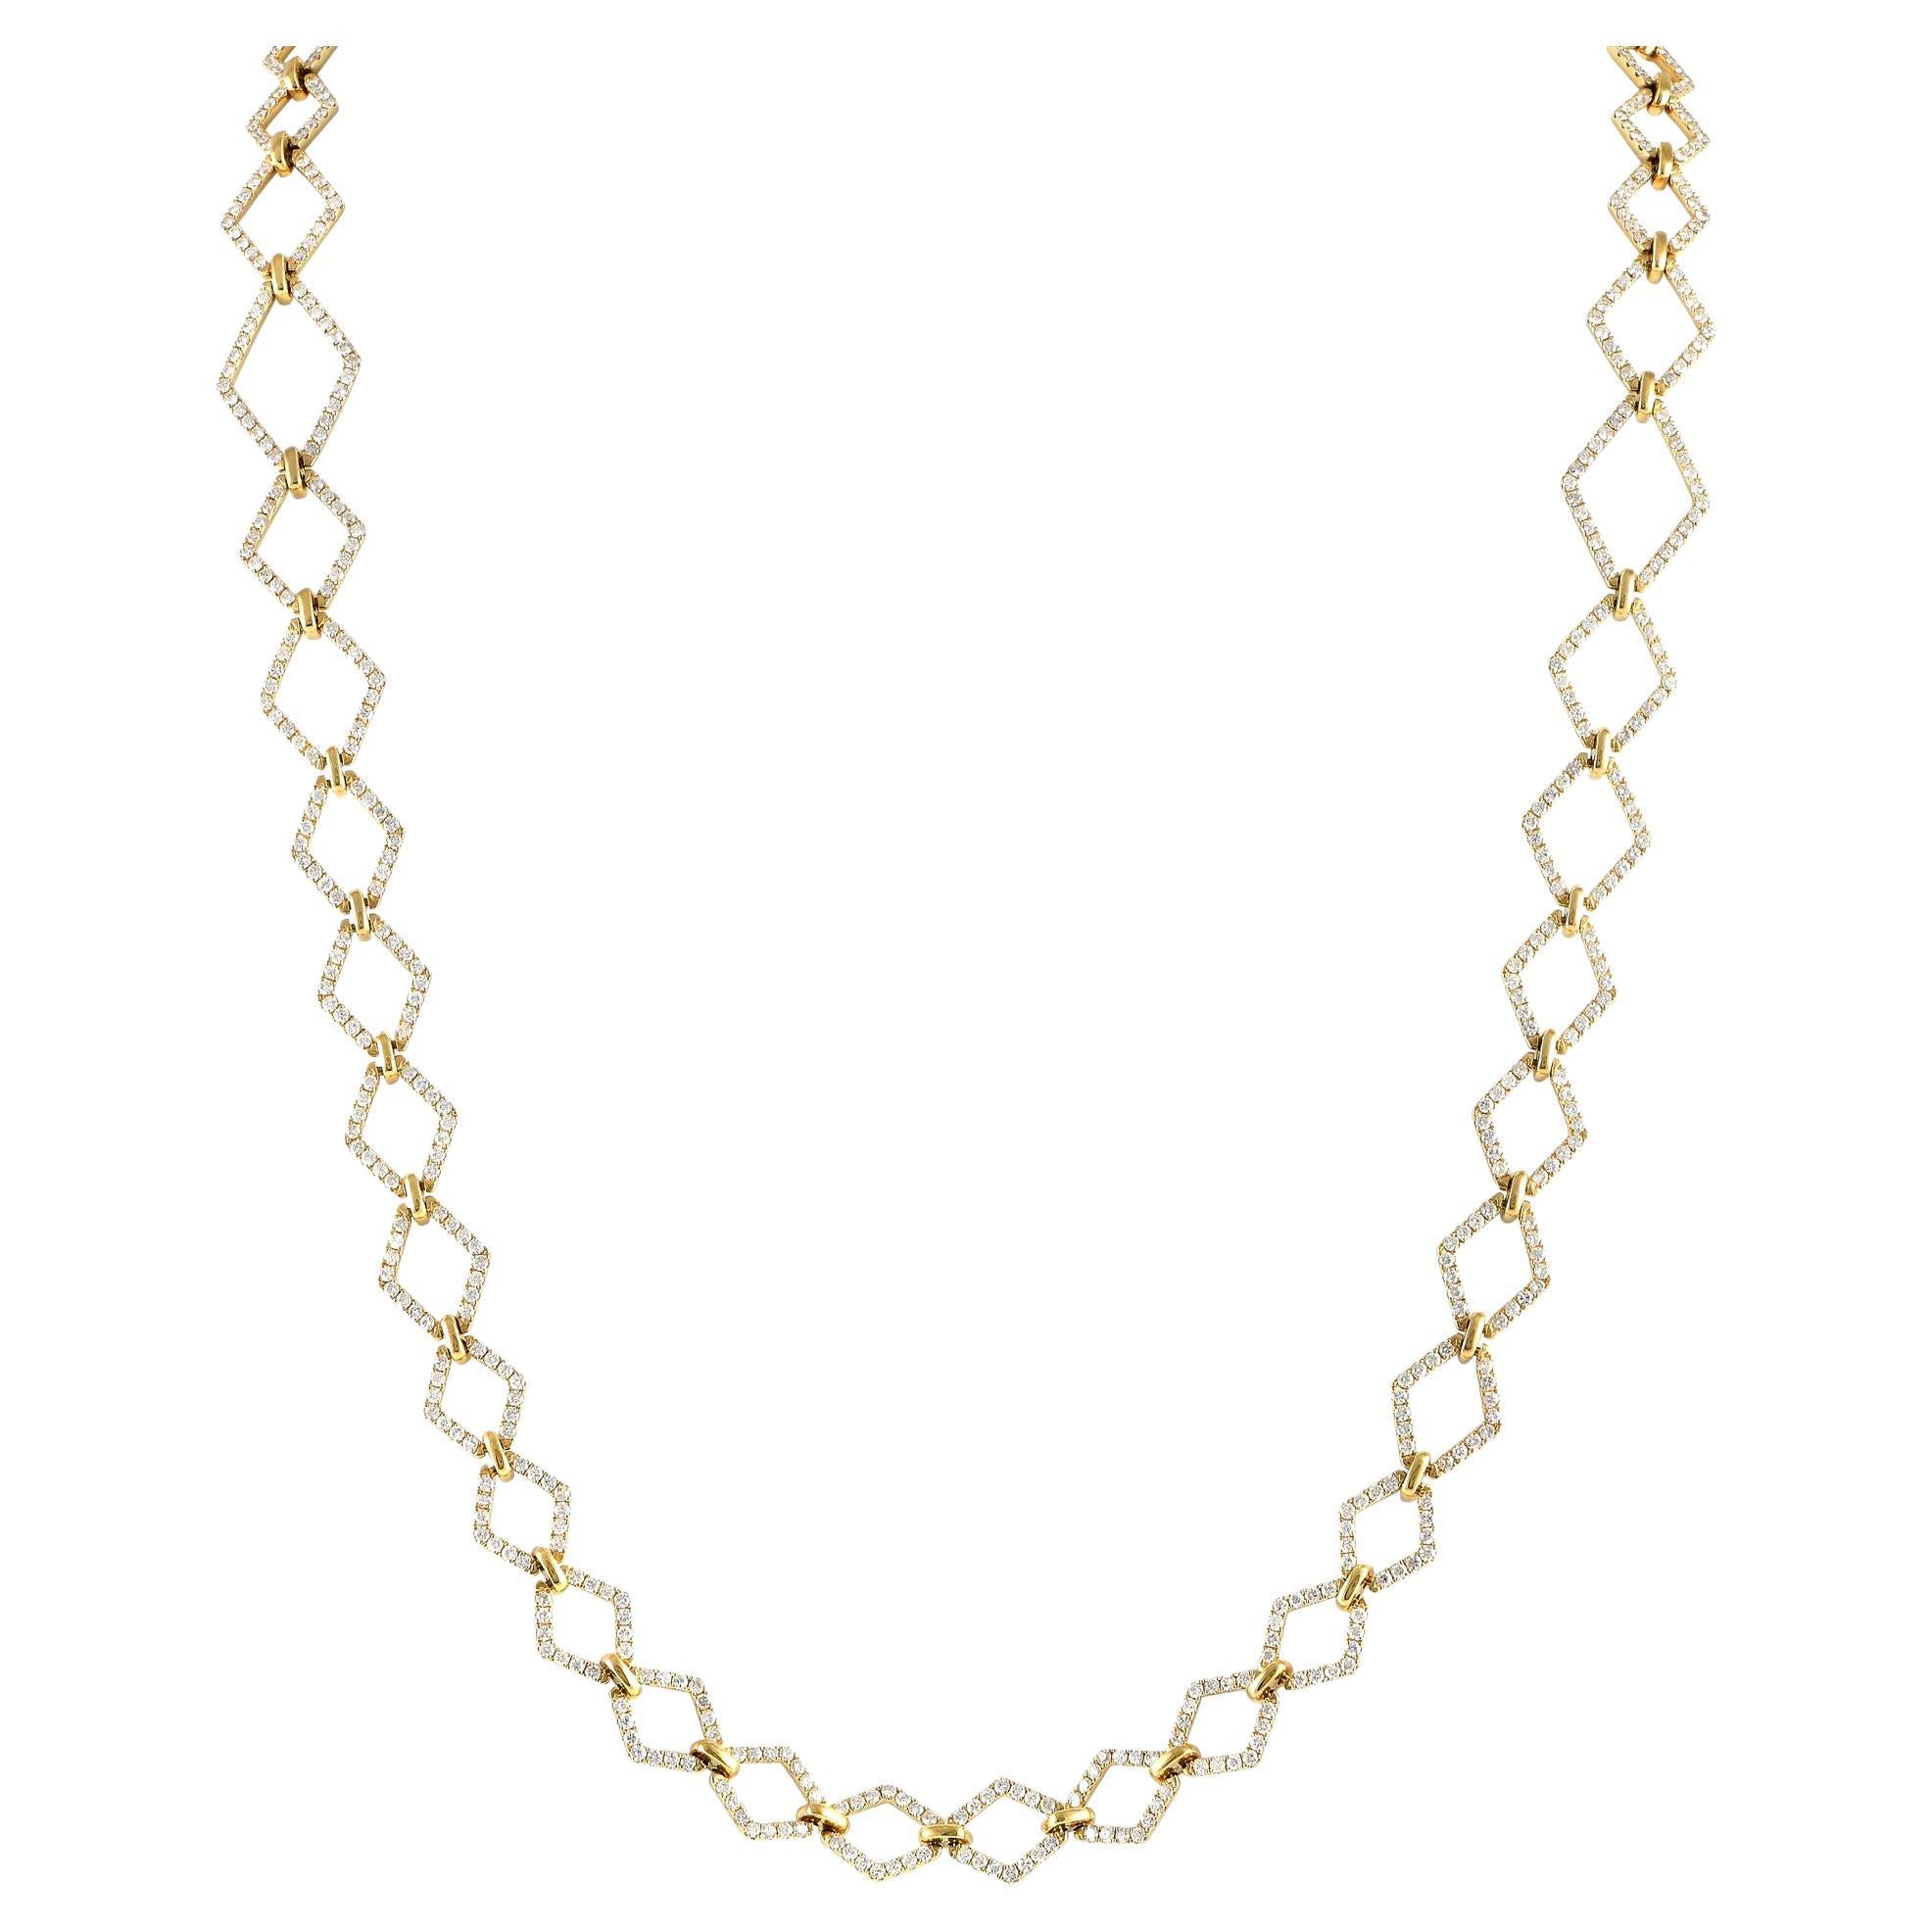 LB Exclusive 18K Yellow Gold 10.60ct Diamond Necklace